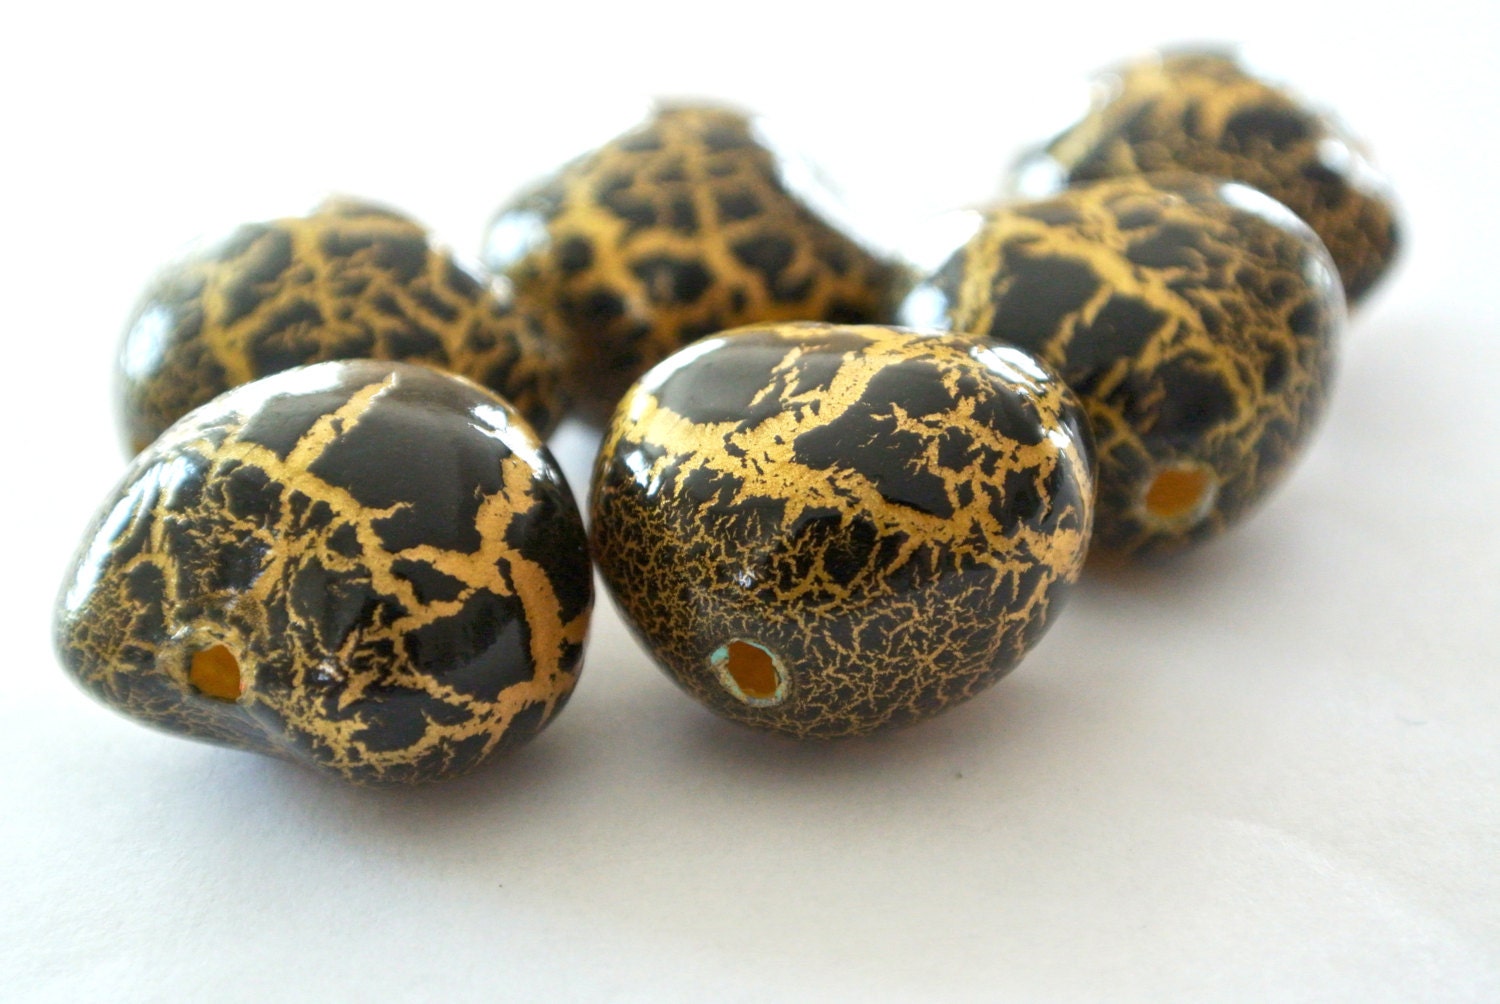 Black Gold Crackled Jewelry Beads - Lightweight Hollow Beads, Black and Gold, Crackled Effect Beads, Jewelry, Gift, Charm - lovelybeads